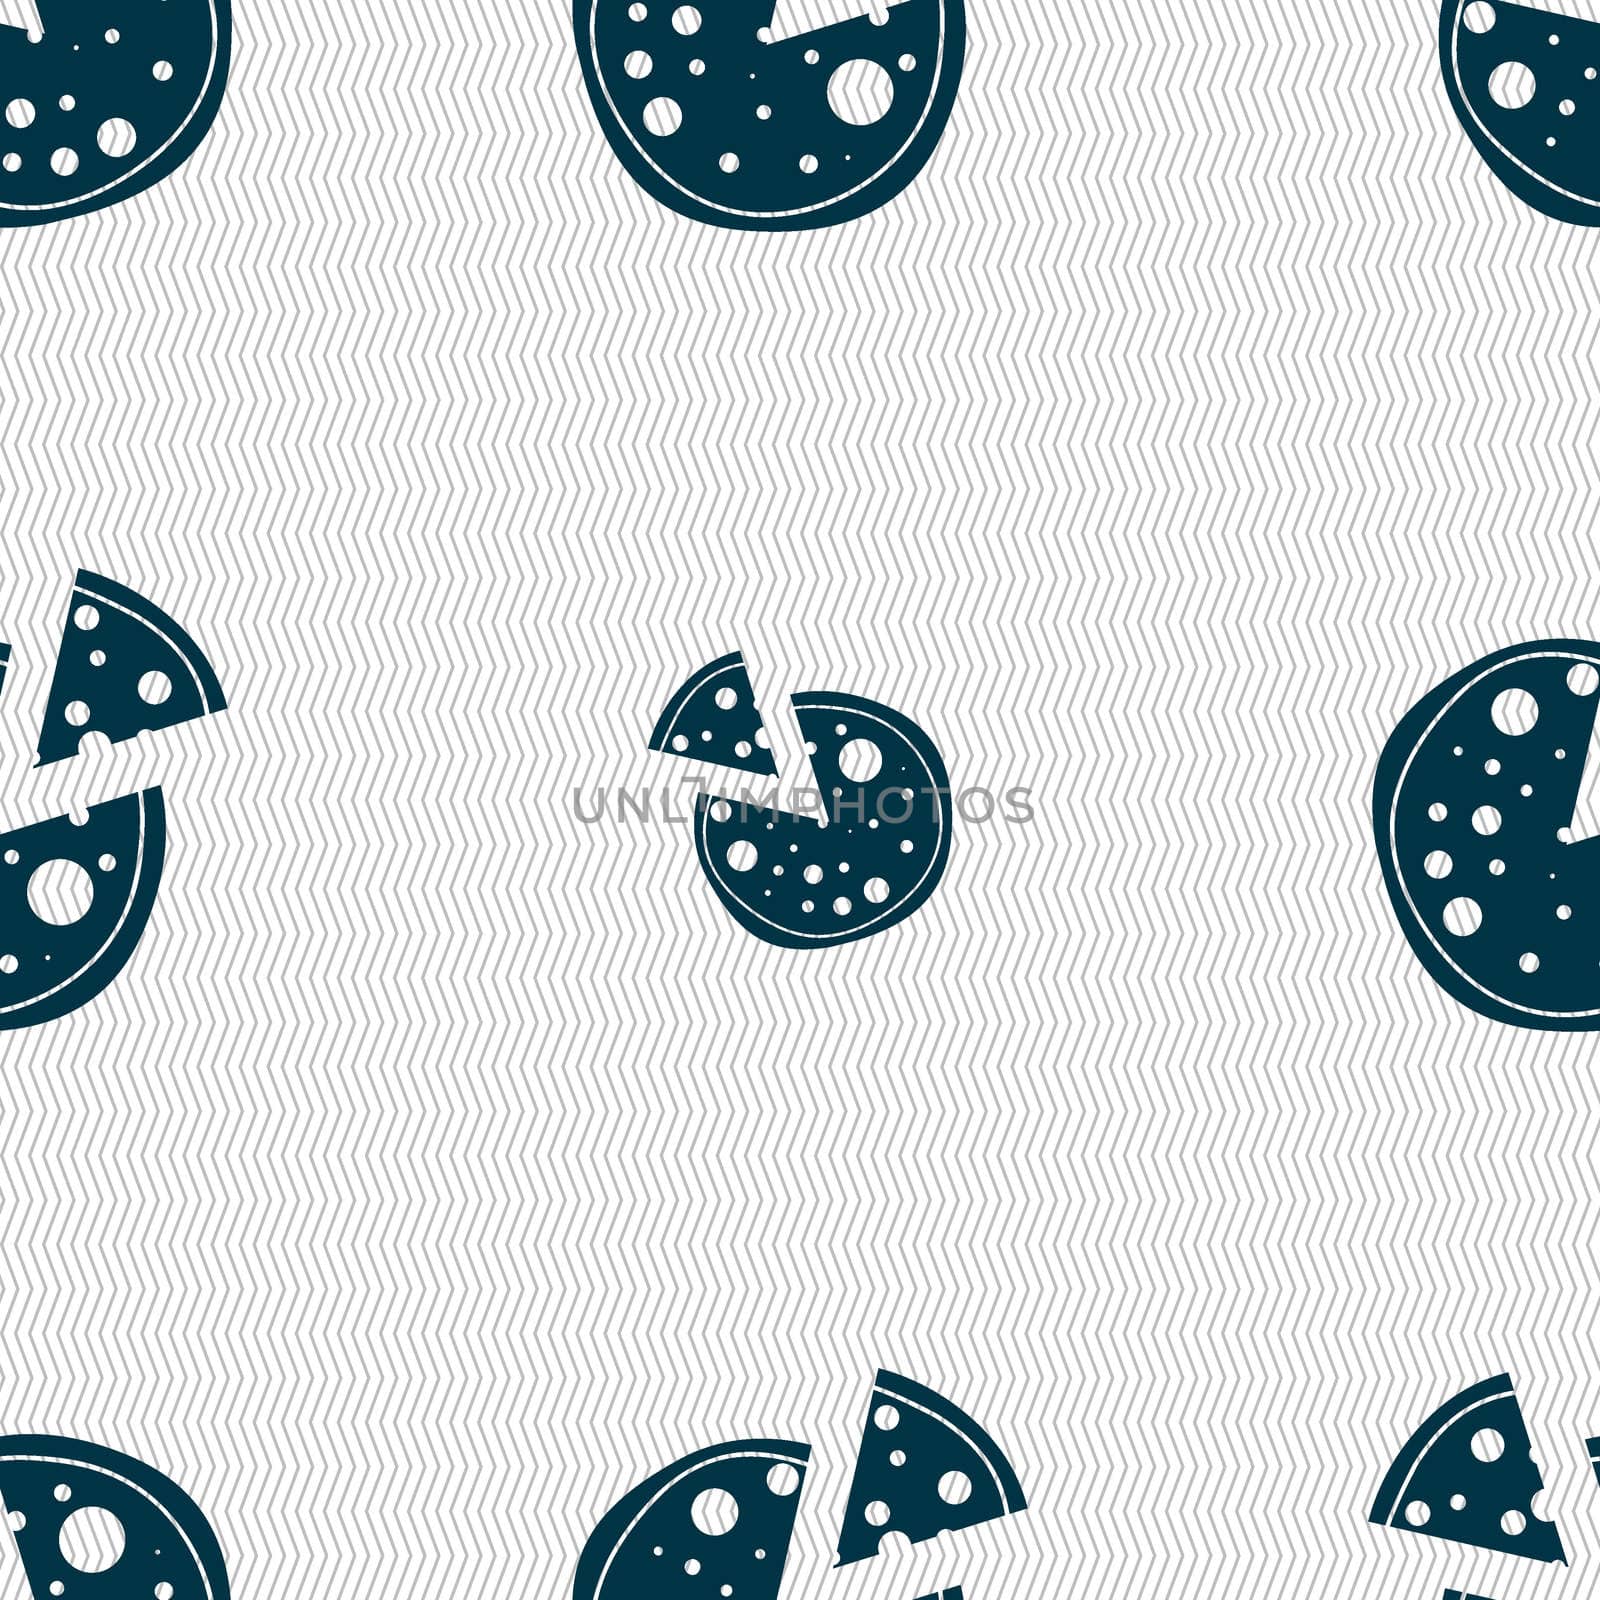 Pizza Icon. Seamless abstract background with geometric shapes. illustration